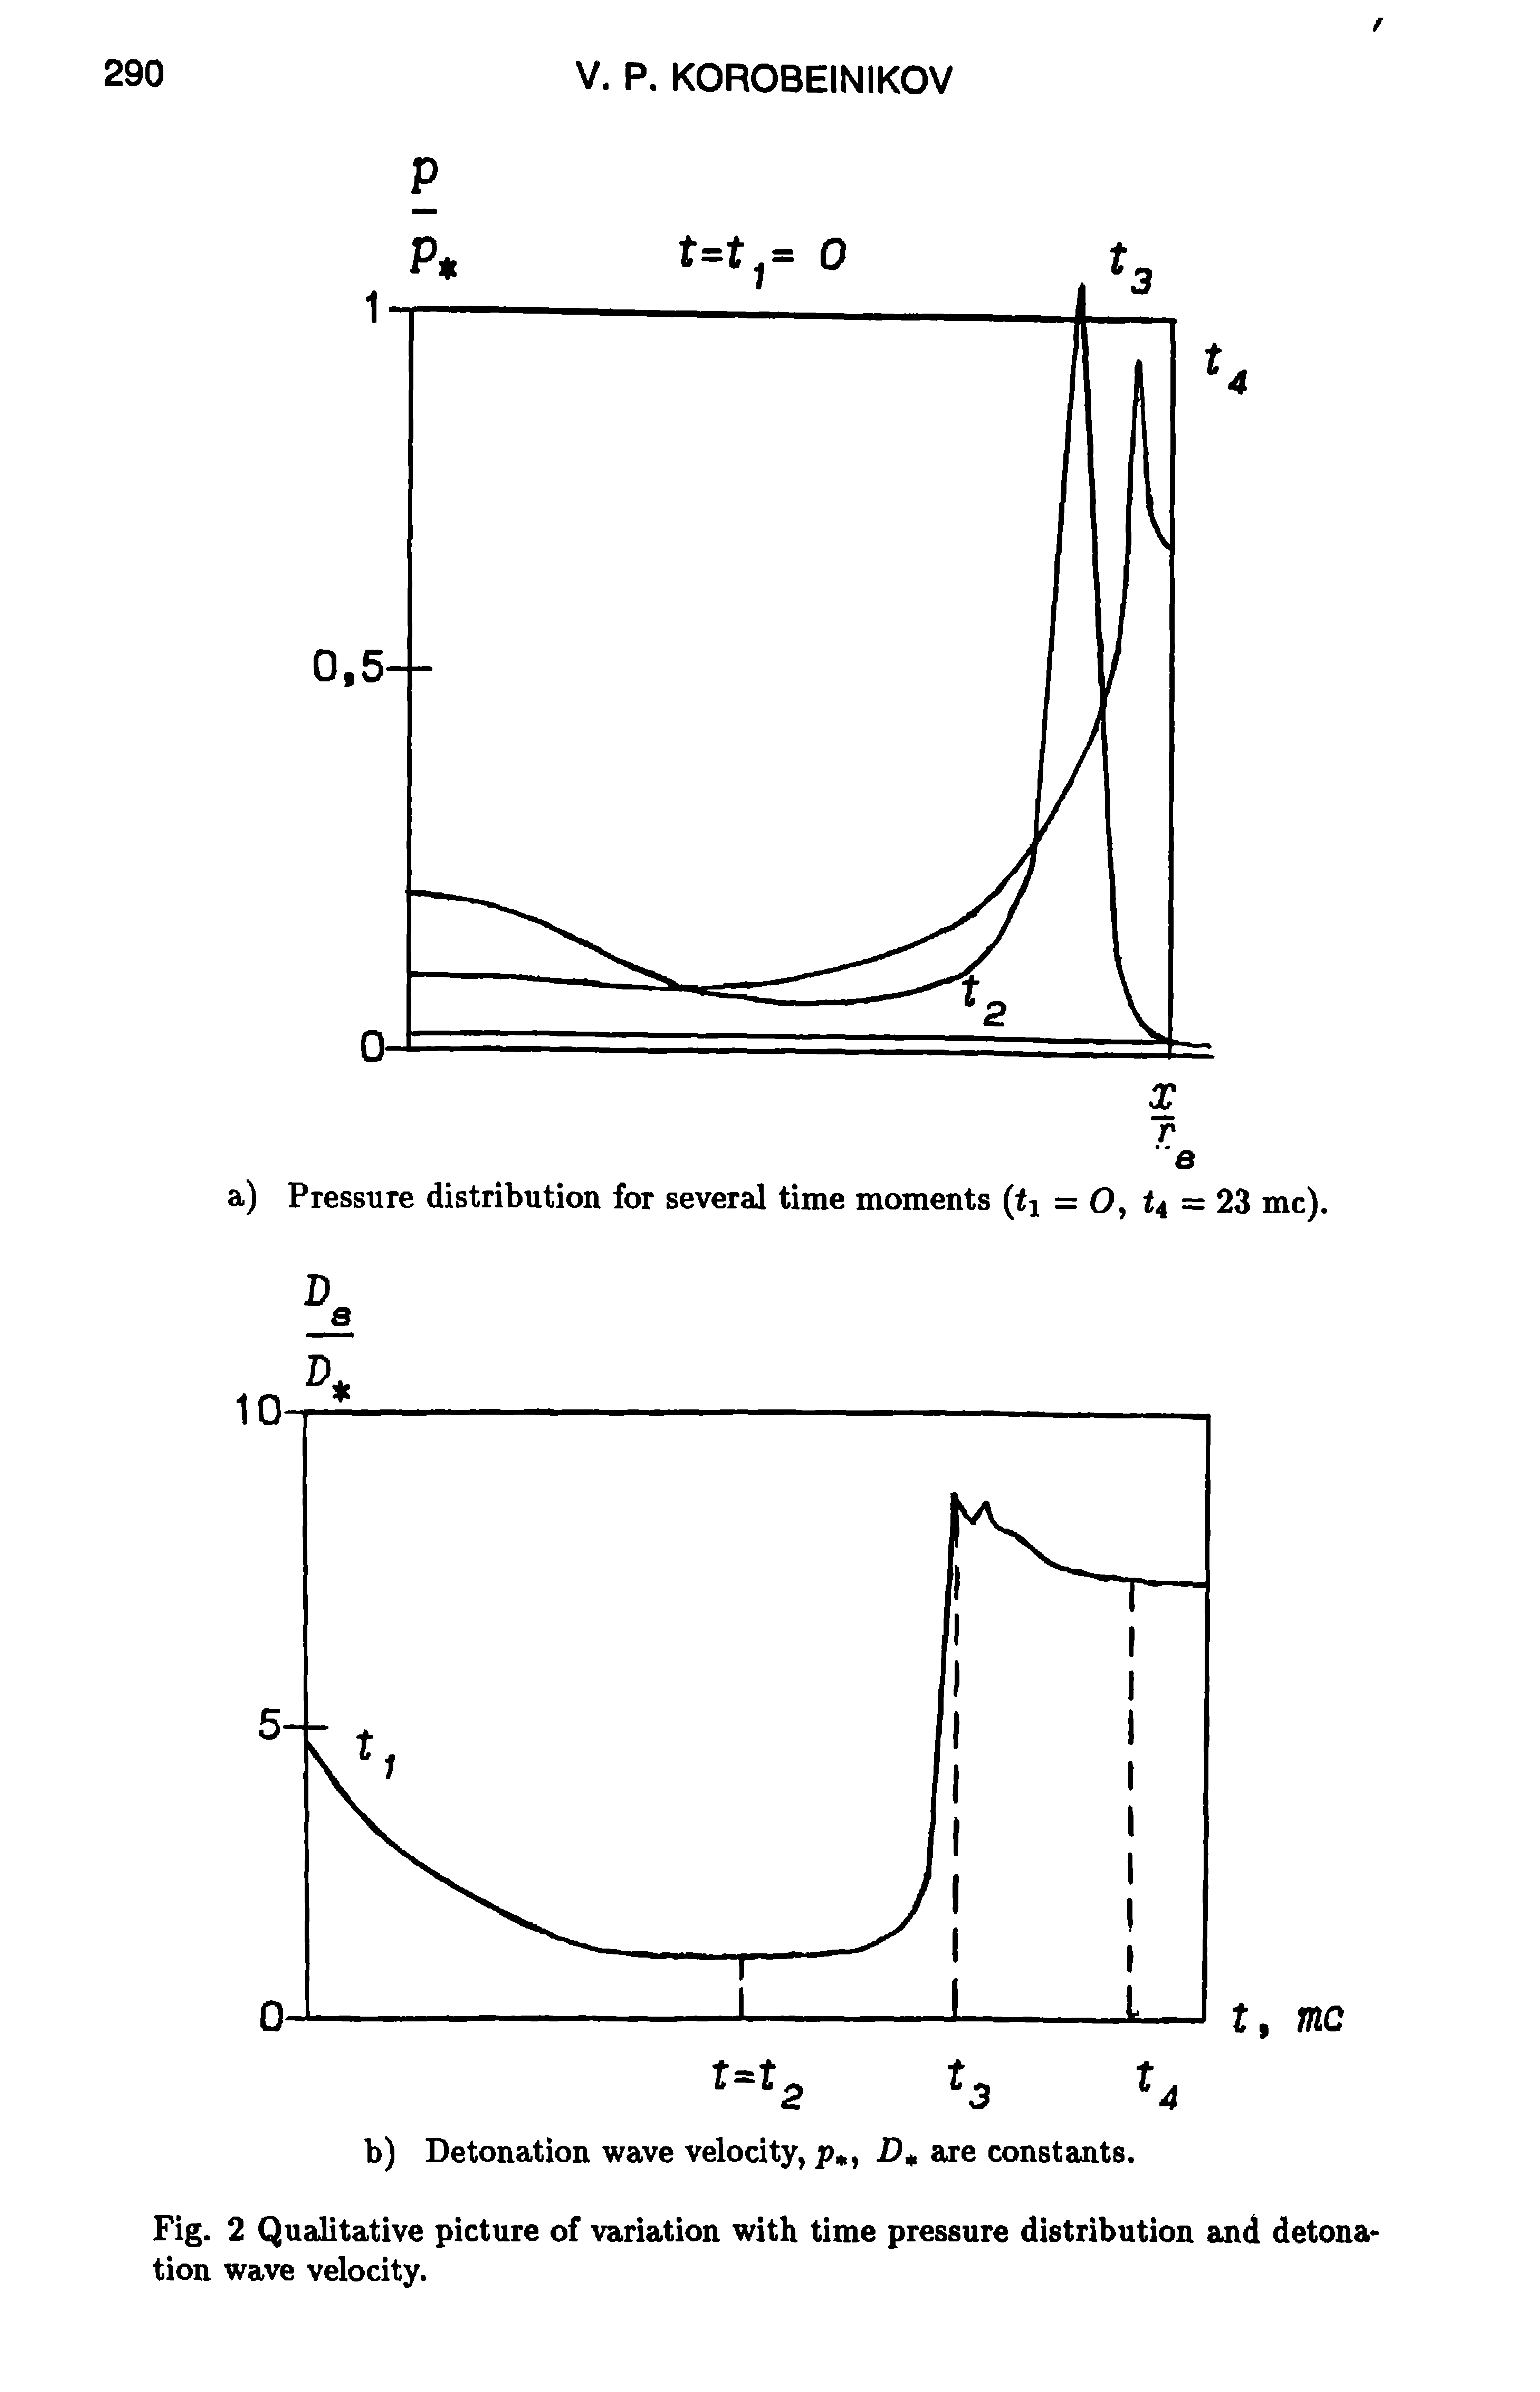 Fig. 2 Qualitative picture of variation with time pressure distribution and detonation wave velocity.